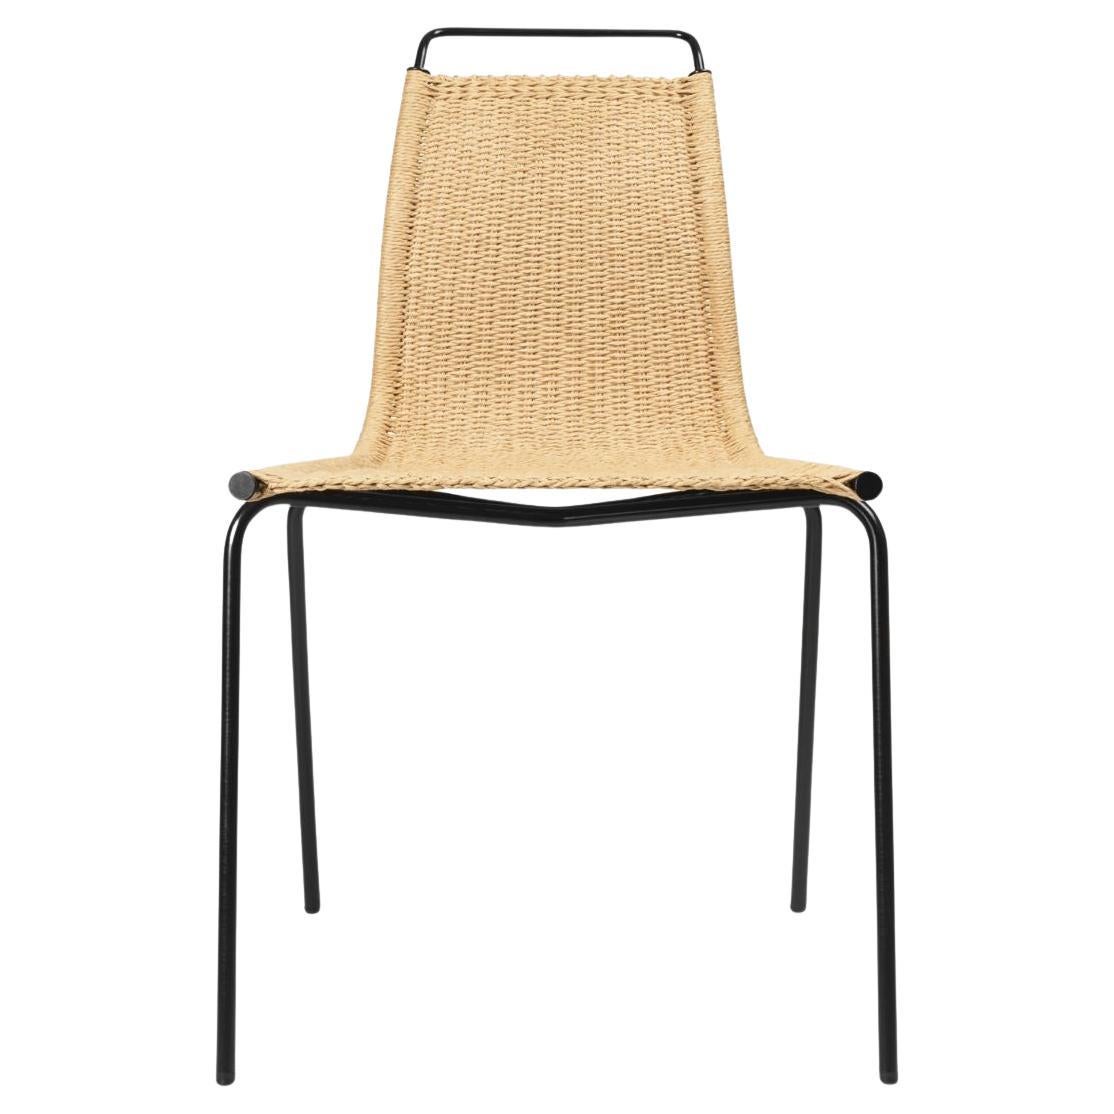 Poul Kjærholm 'PK1' Chair in Black Steel and Paper Cord for Carl Hansen & Son For Sale